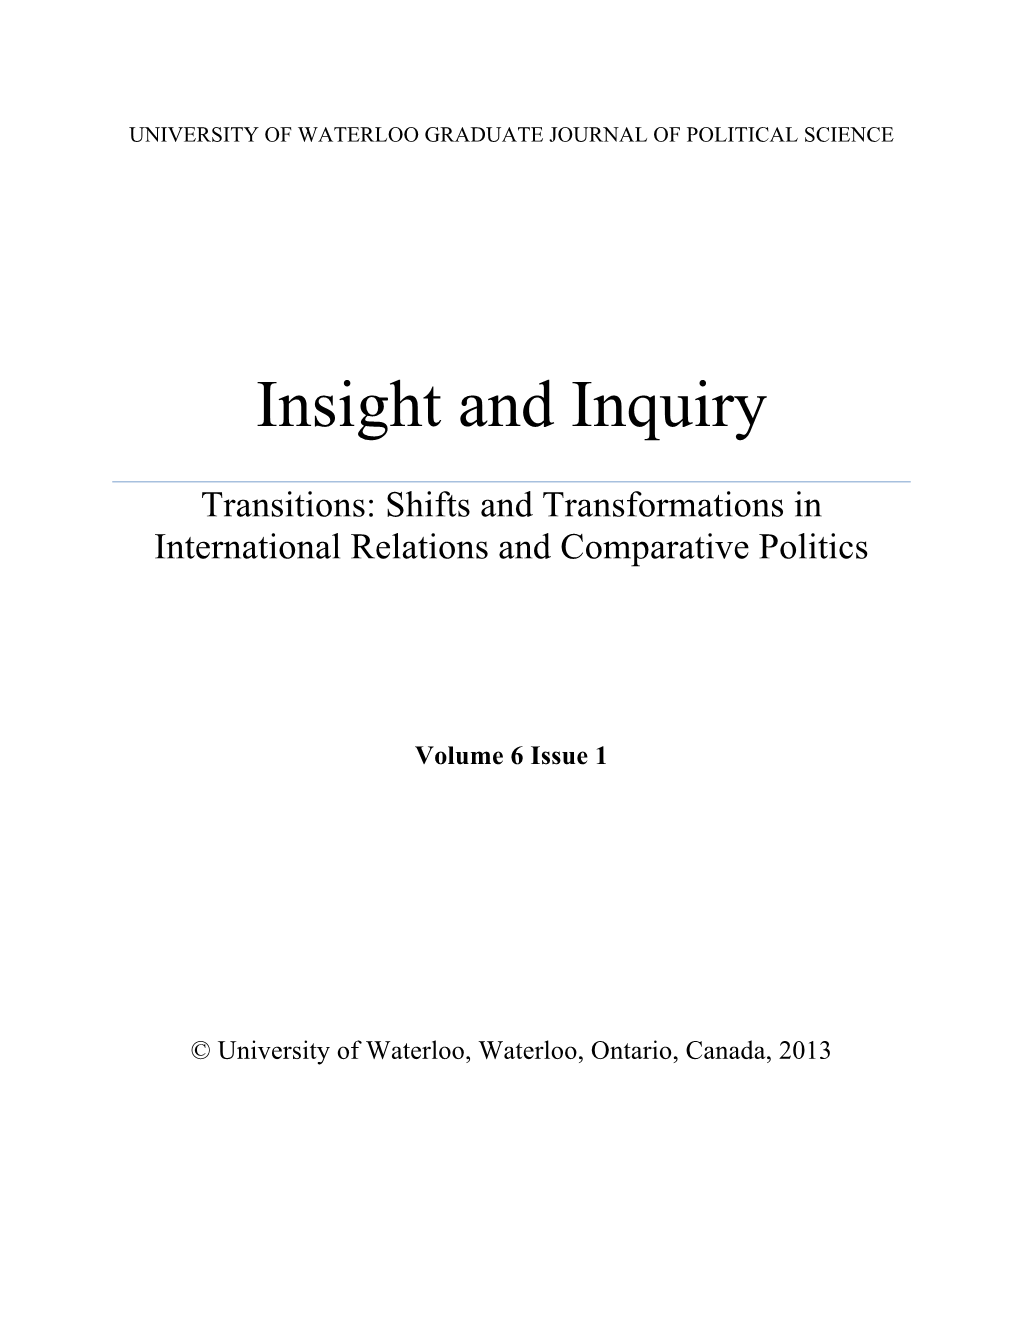 Insight and Inquiry